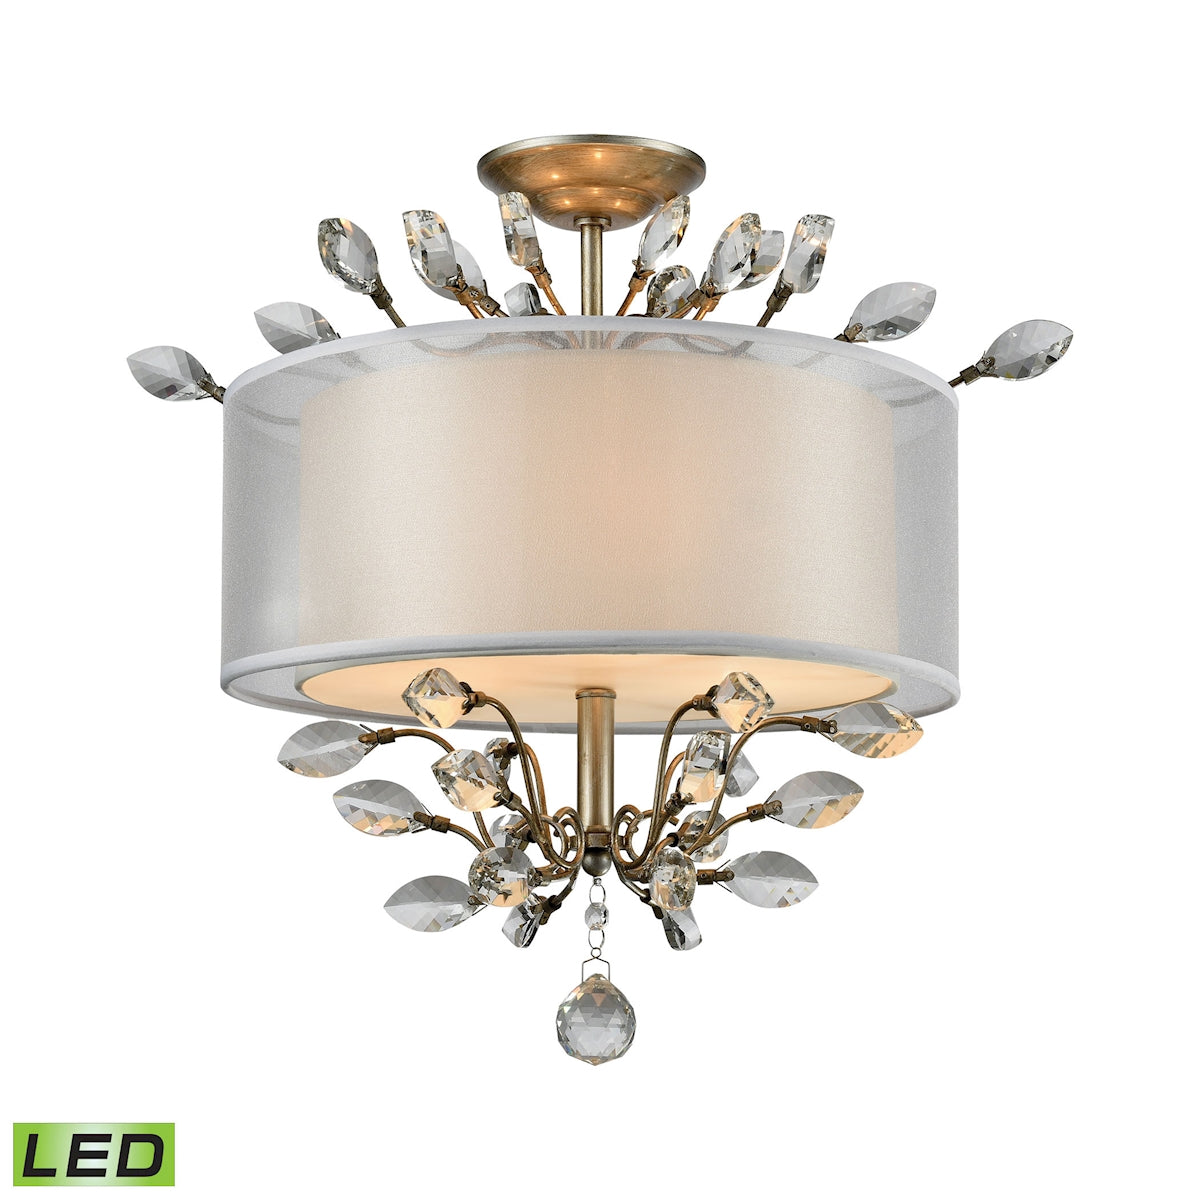 ELK Lighting 16281/3-LED Asbury 3-Light Semi Flush in Aged Silver with Organza and Fabric Shade - Includes LED Bulbs